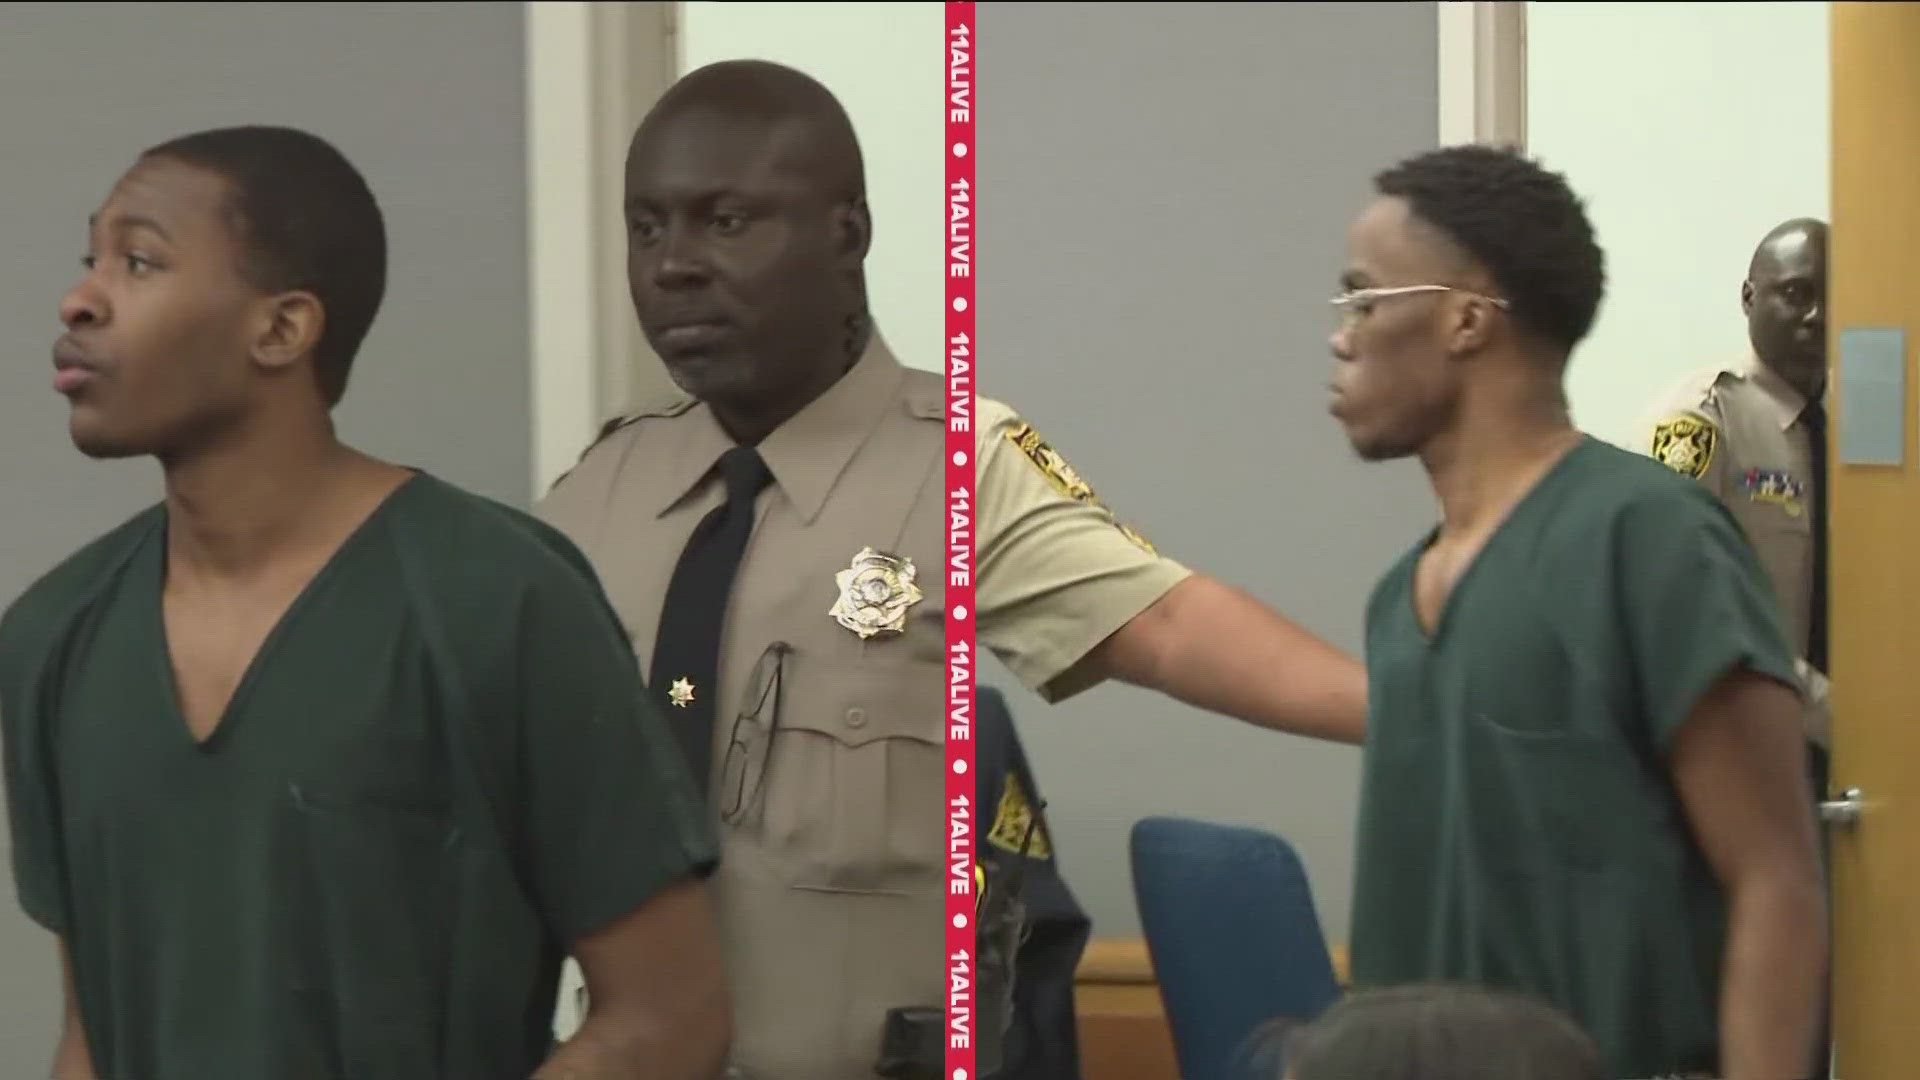 Two men have been sentenced to life in prison for the murder of Jackson County high school football star Elijah Dewitt.